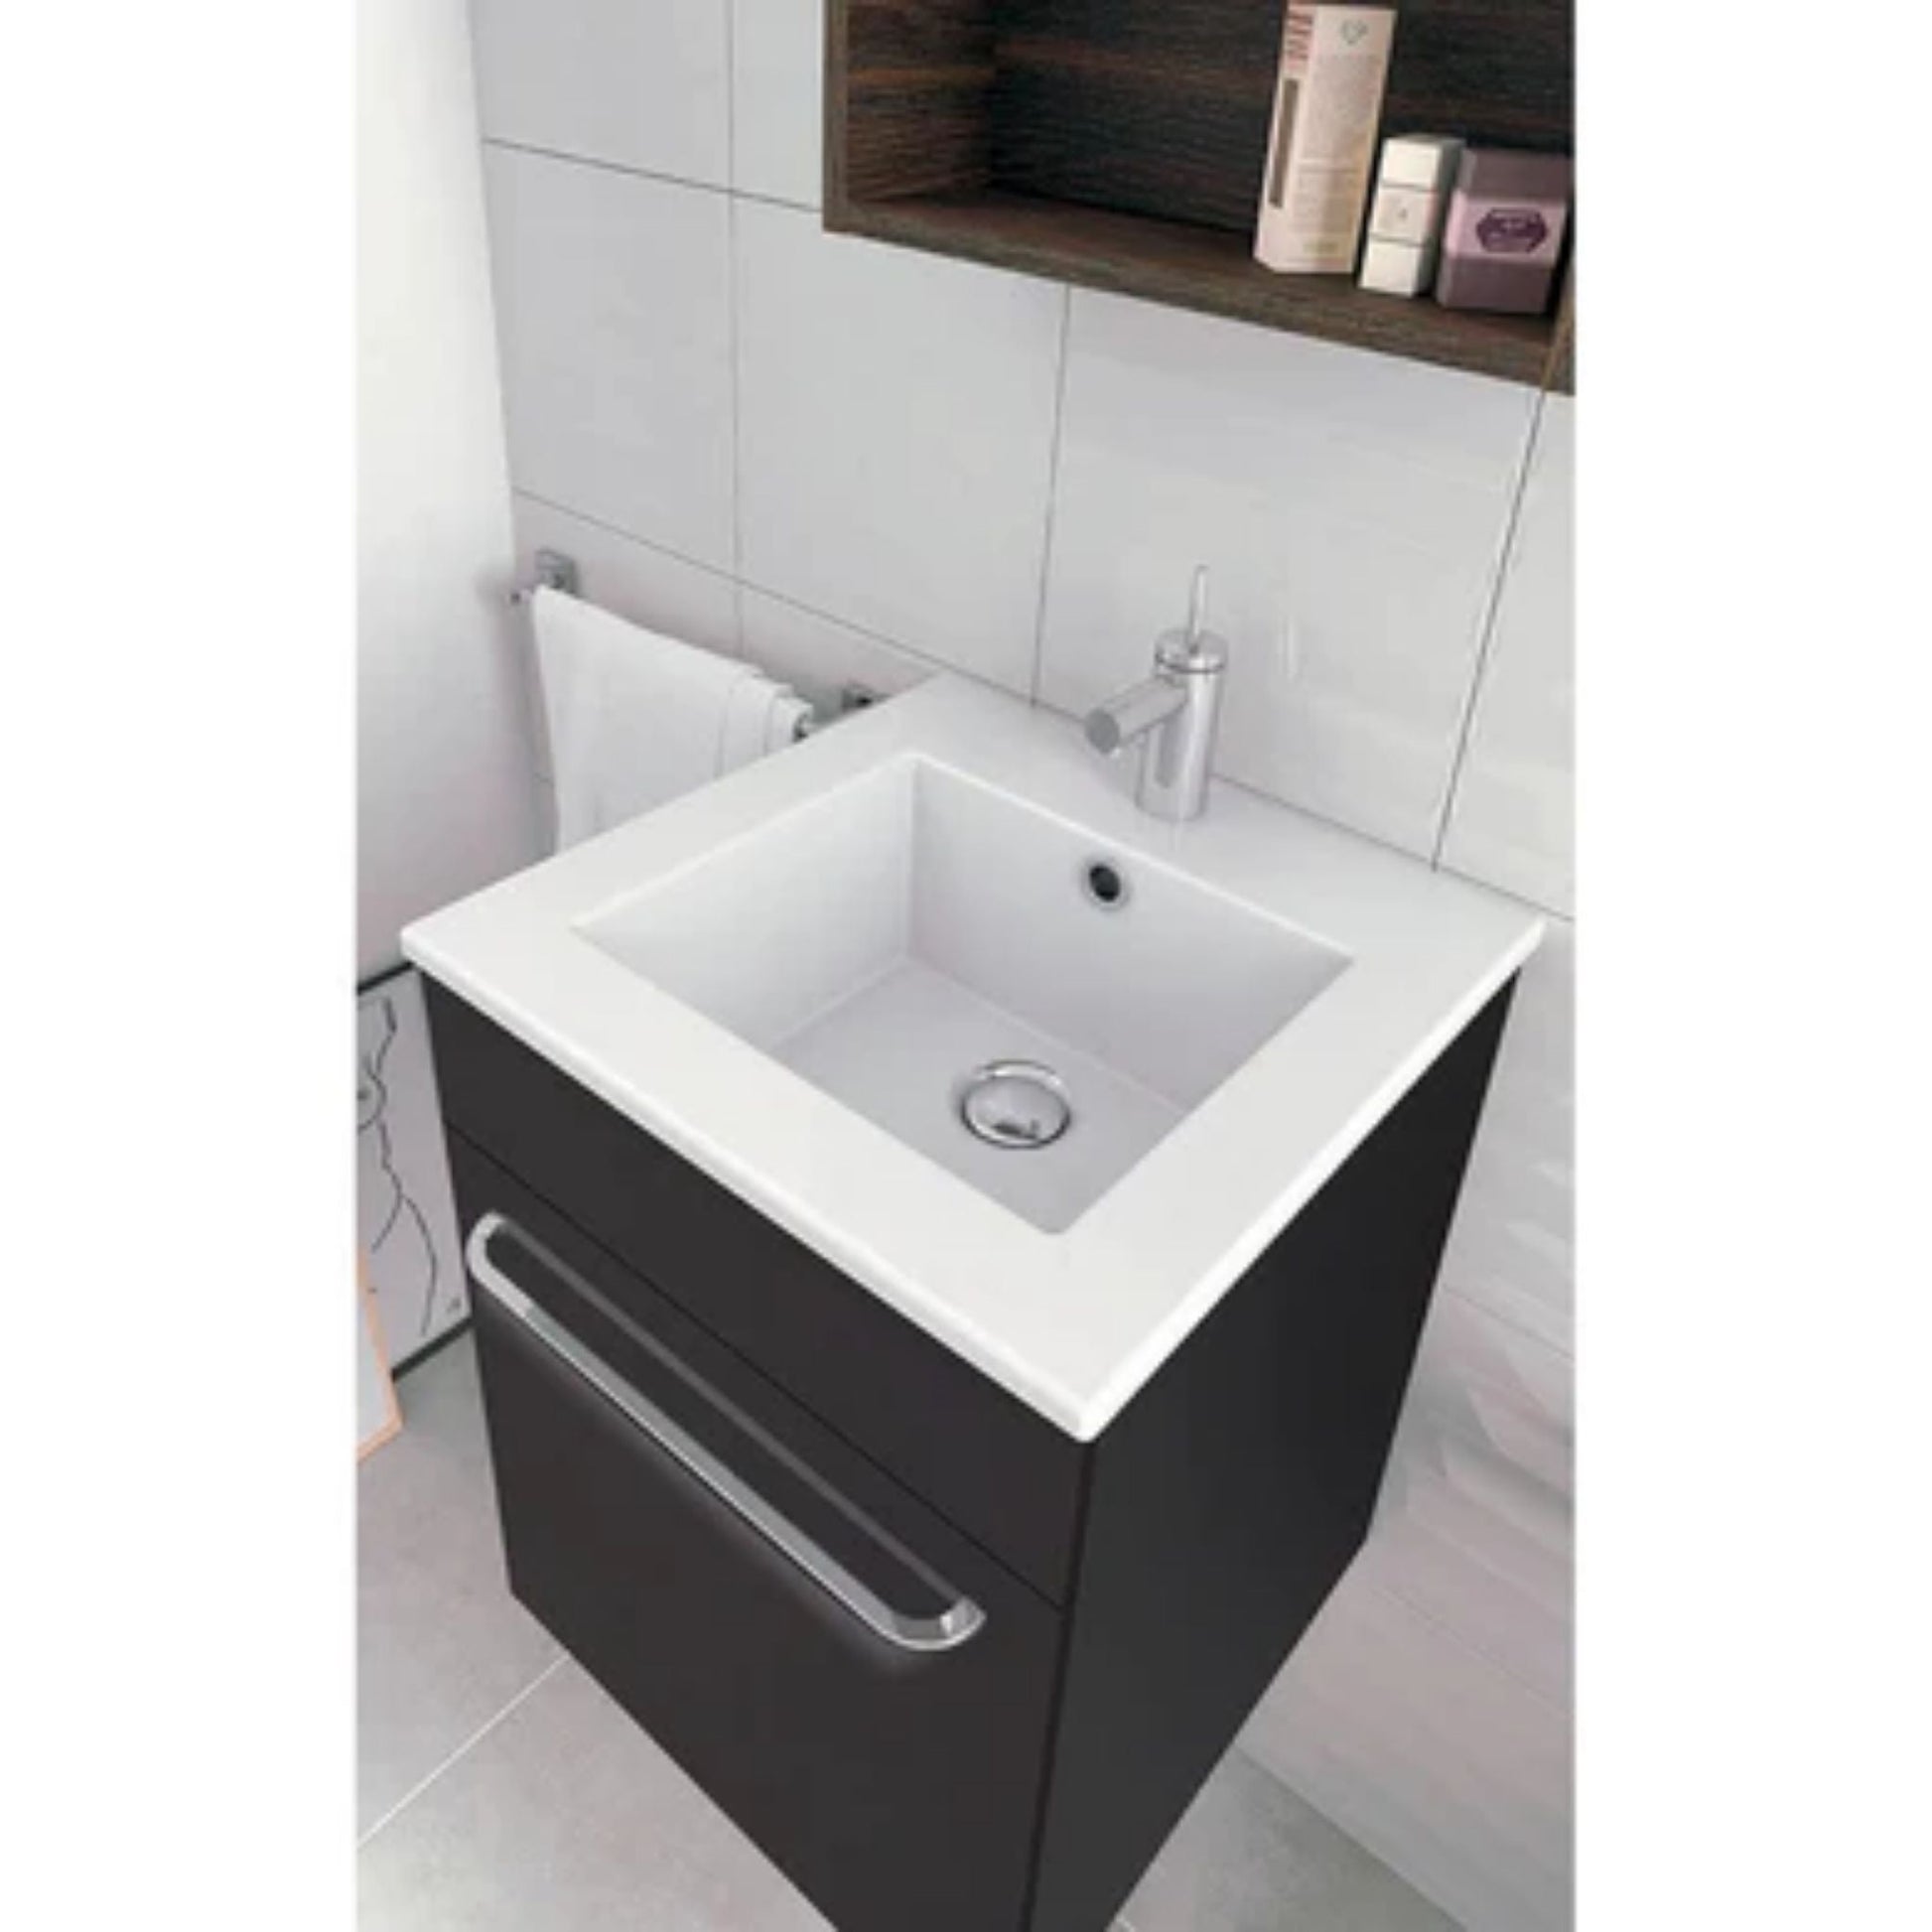 LessCare Qubo by Royo 16" Anthracite Modern Wall-Mount Vanity Set